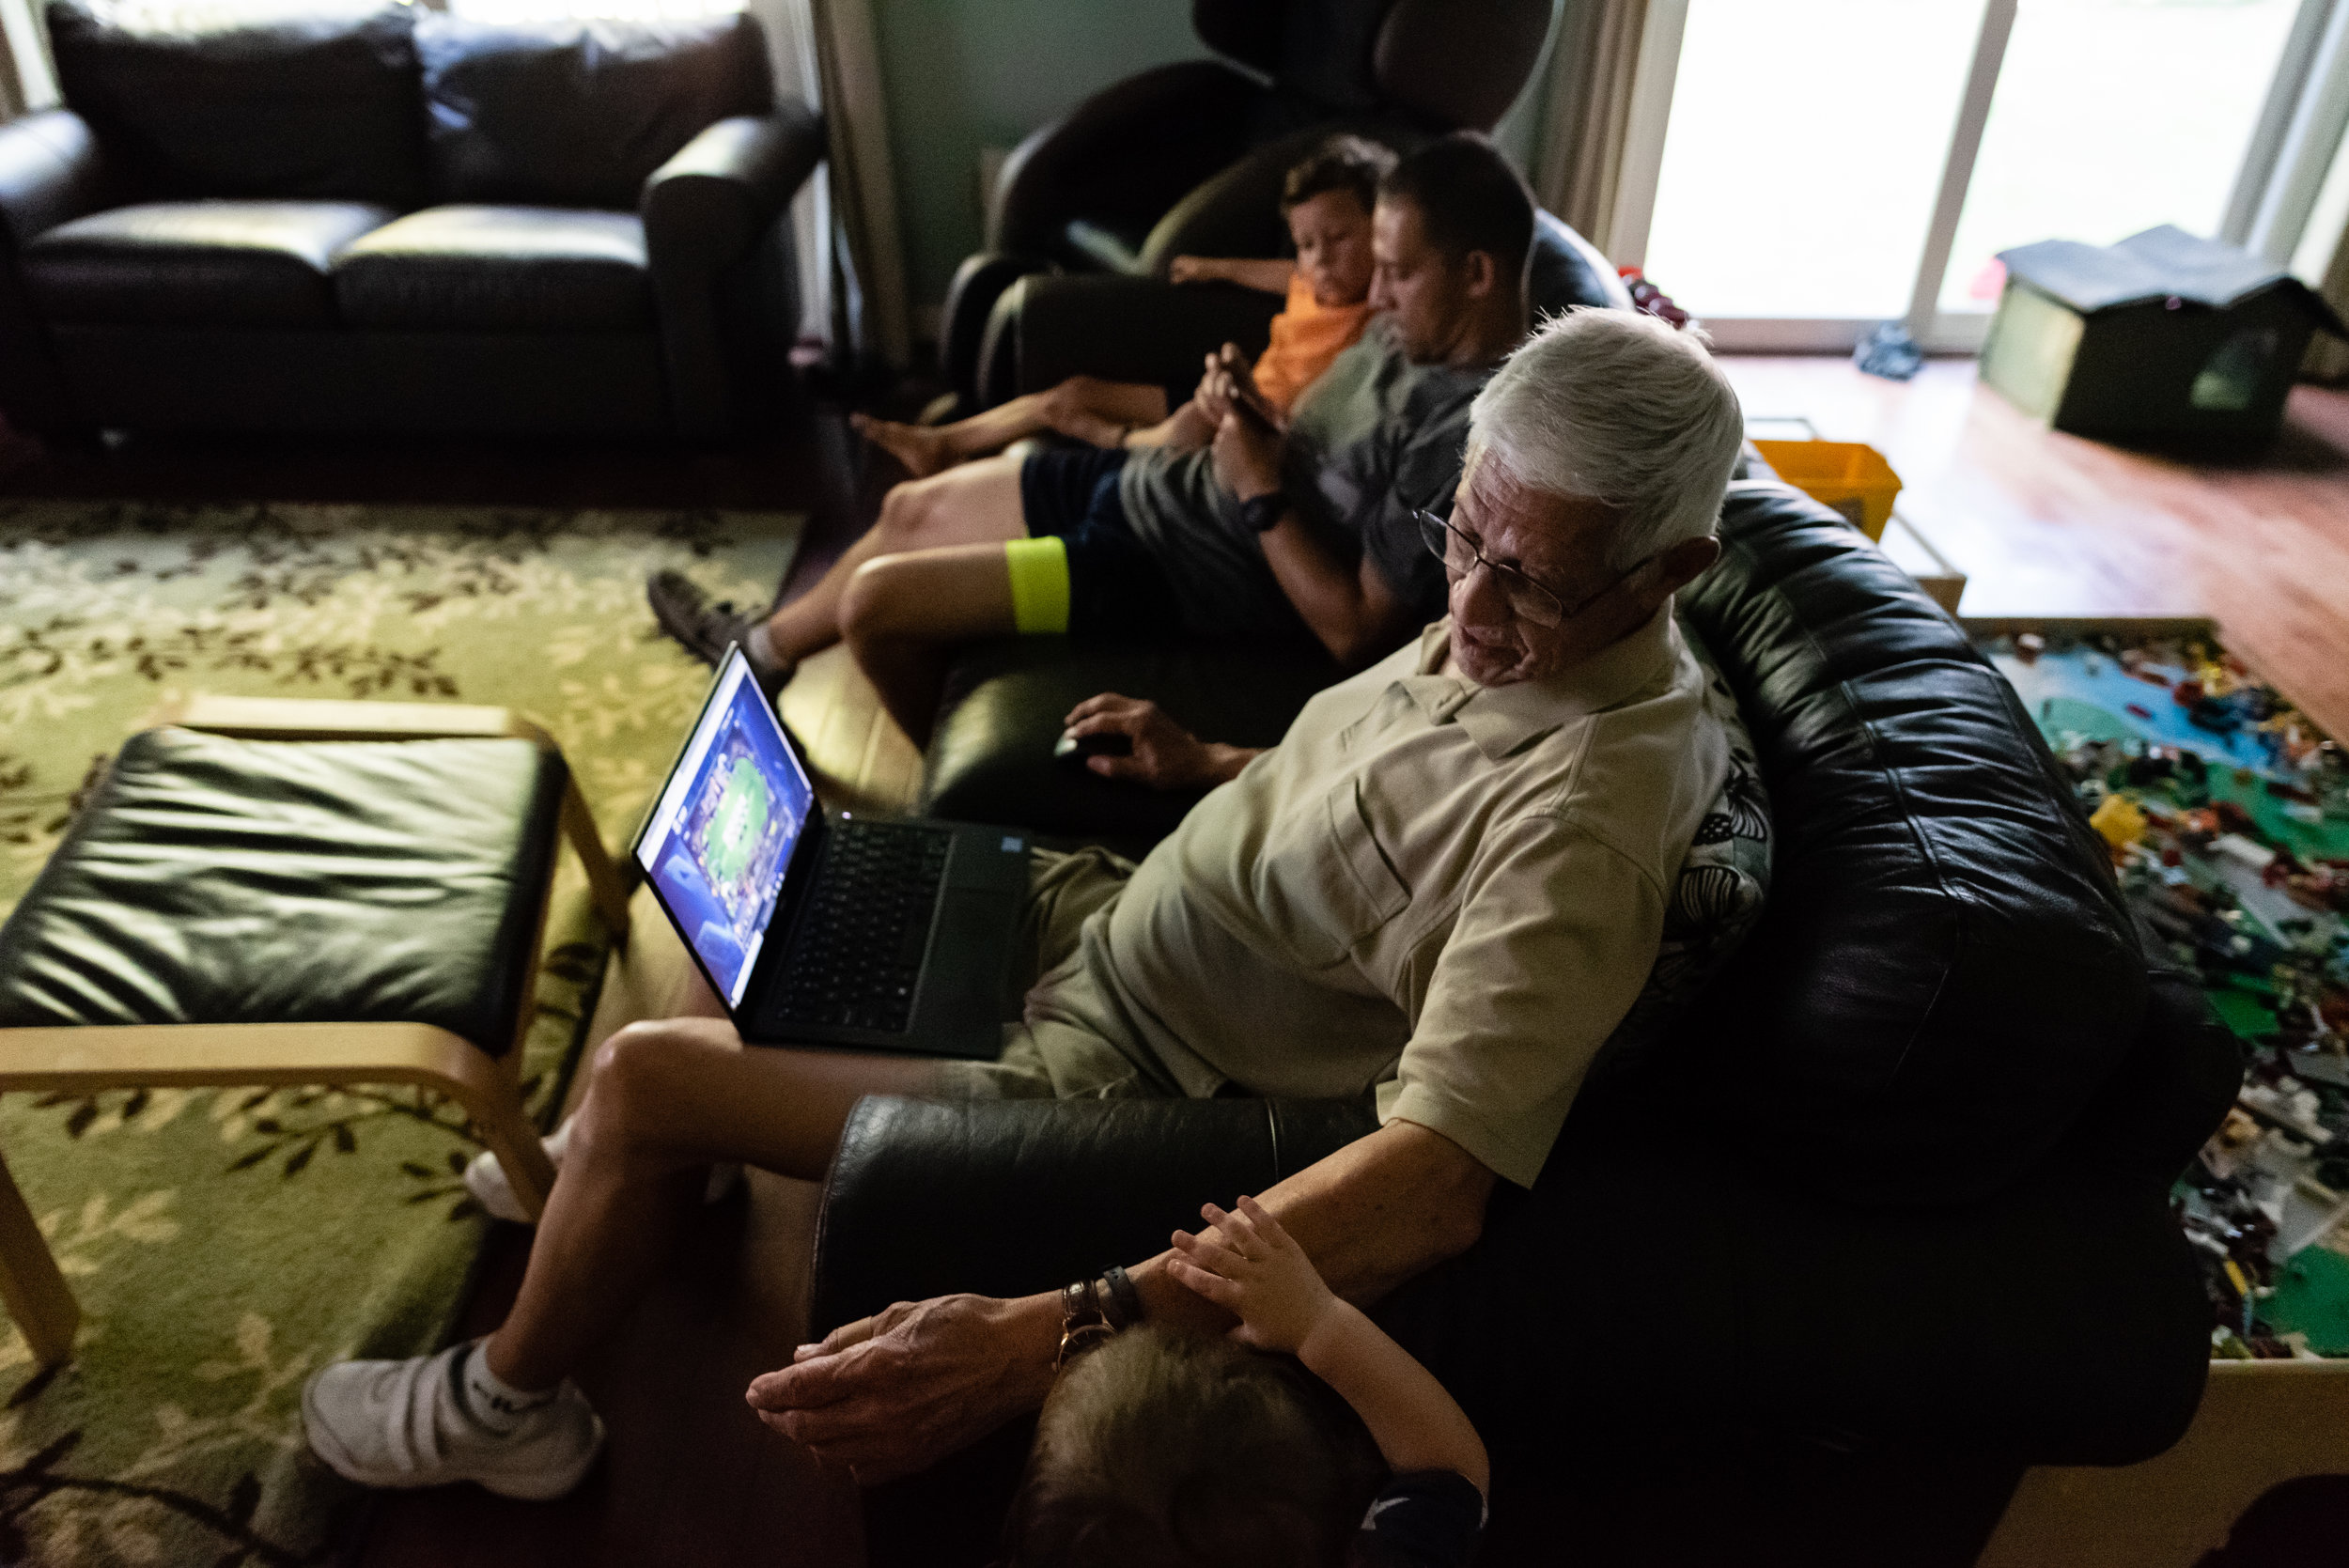 Father son and Grandpa screen time by Northern Virginia Family Photographer Nicole Sanchez